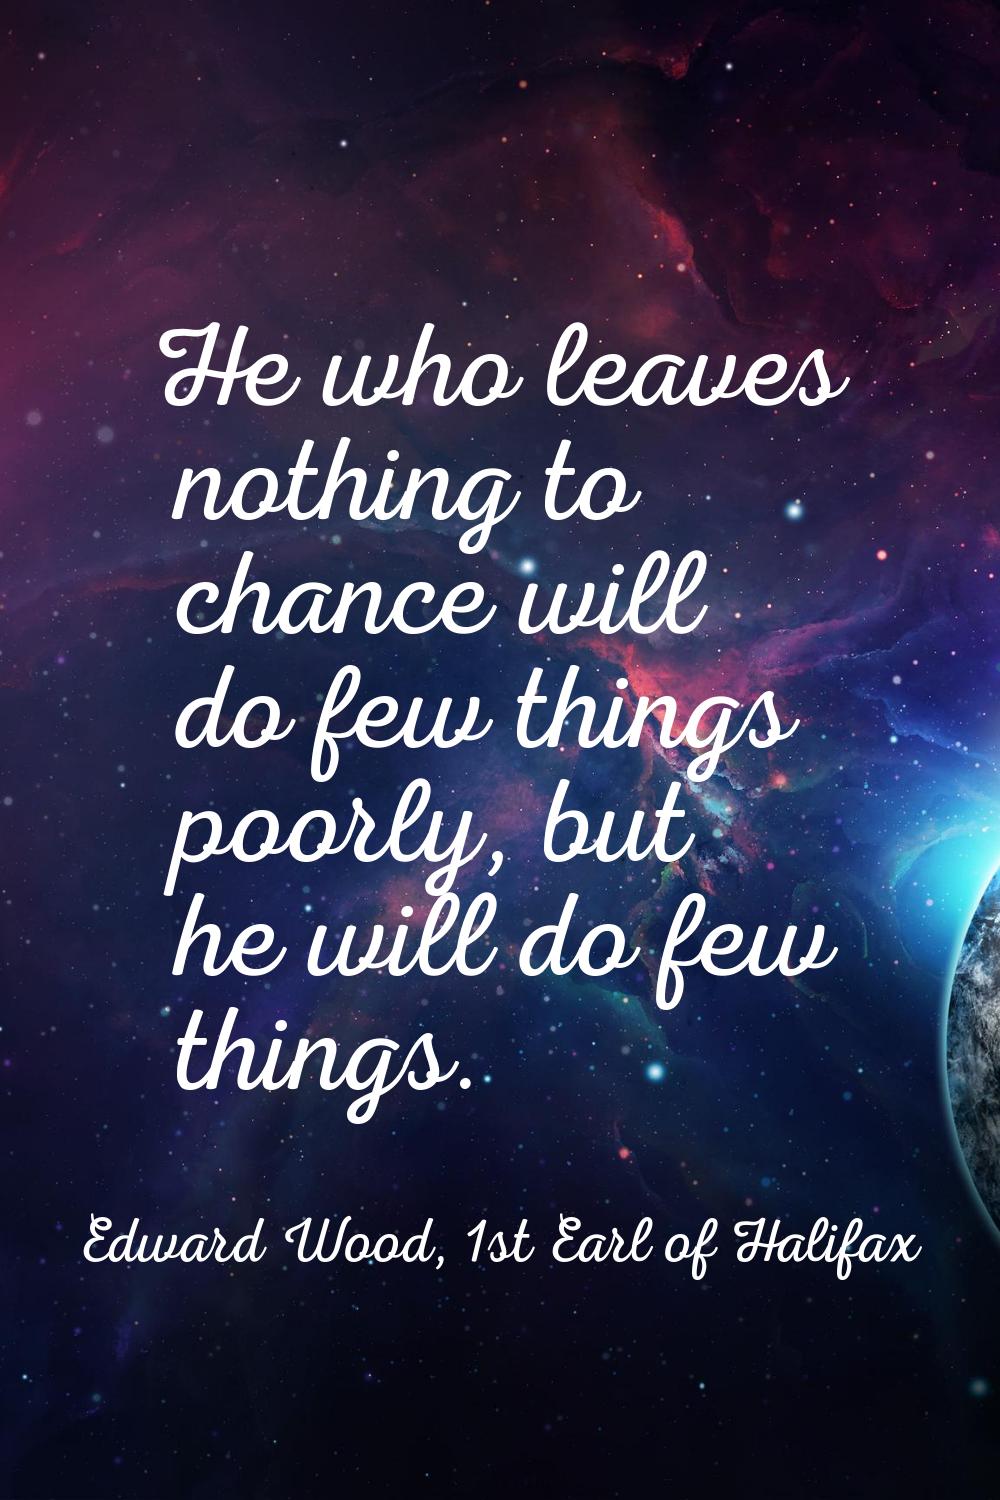 He who leaves nothing to chance will do few things poorly, but he will do few things.